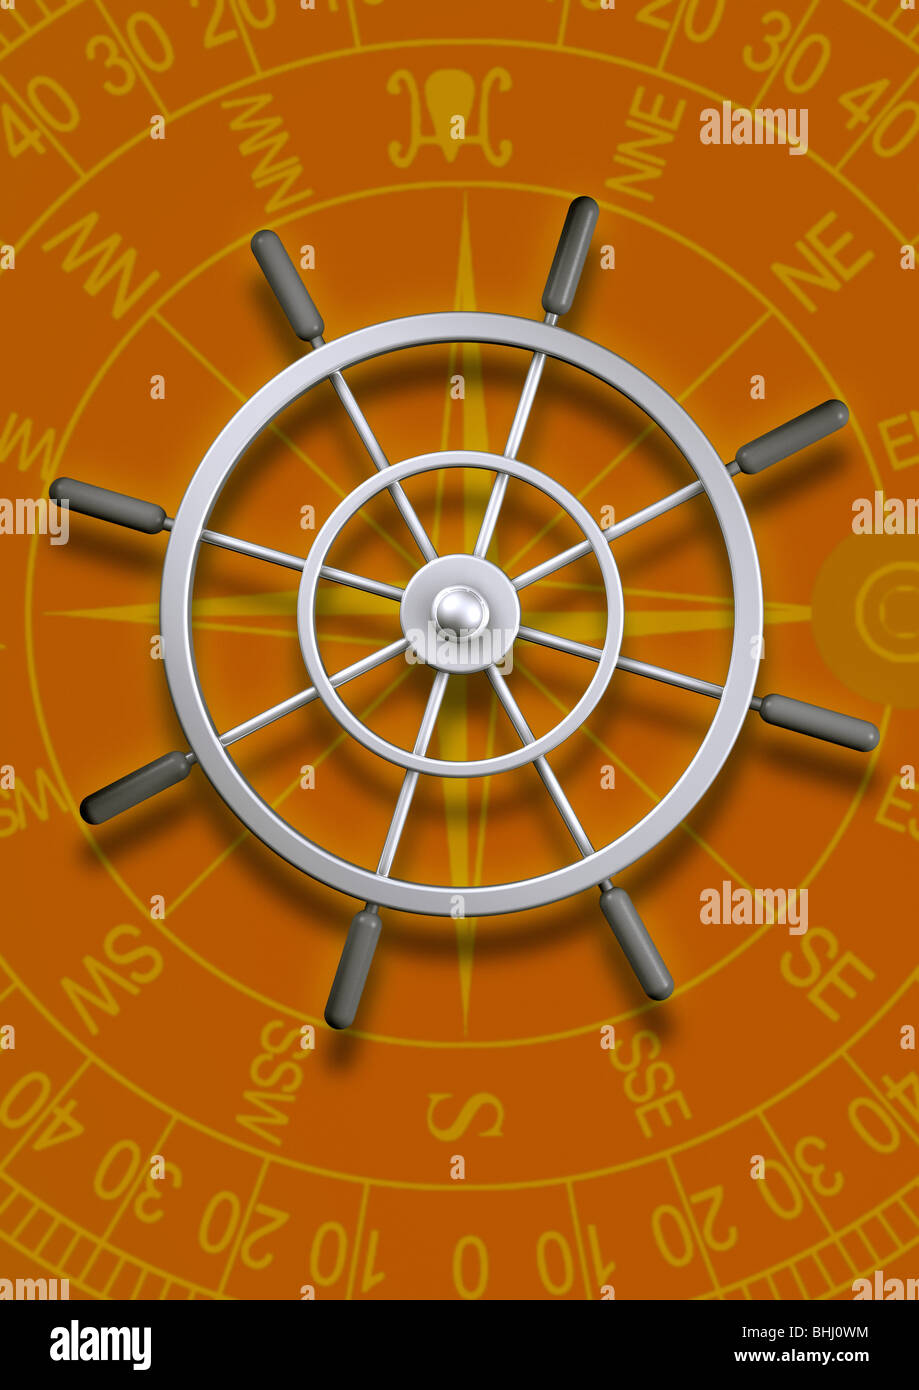 silver steering wheel on a background with compass rose Stock Photo